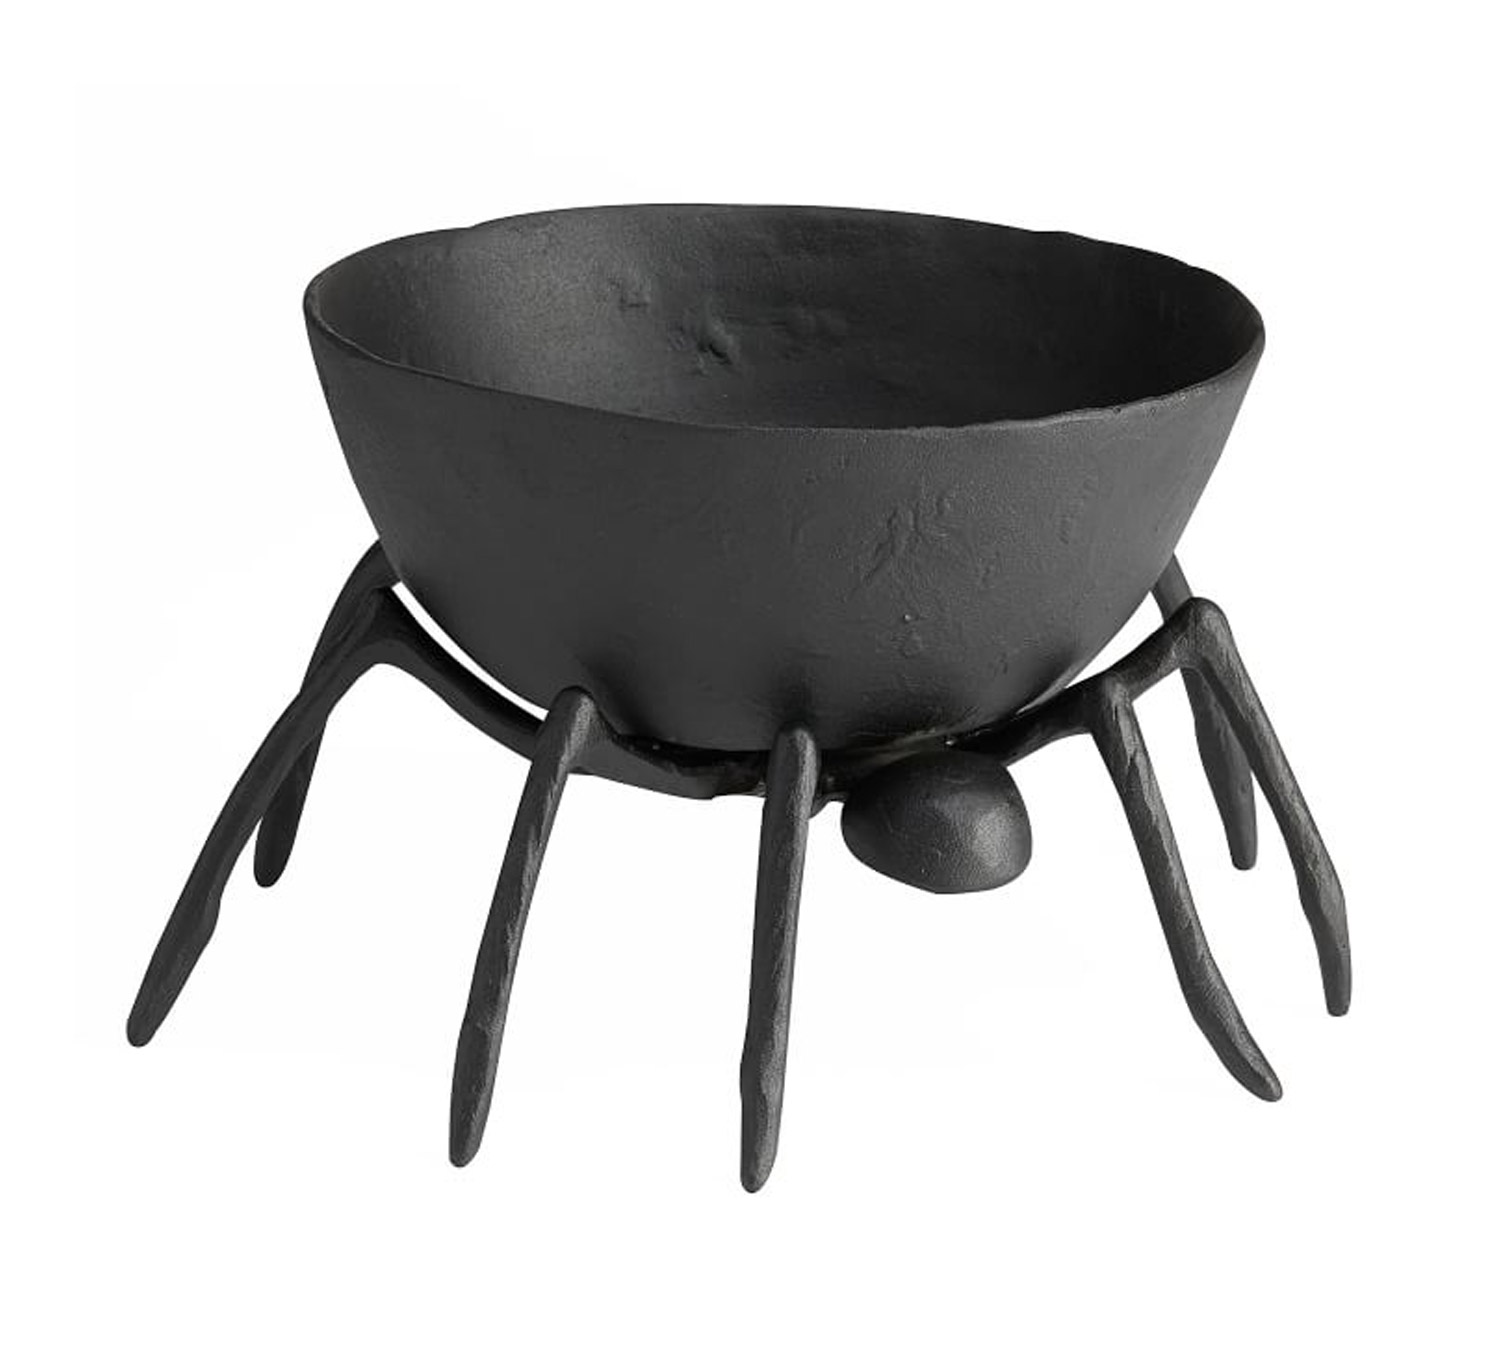 Metal Spider Shaped Halloween Candy Bowl